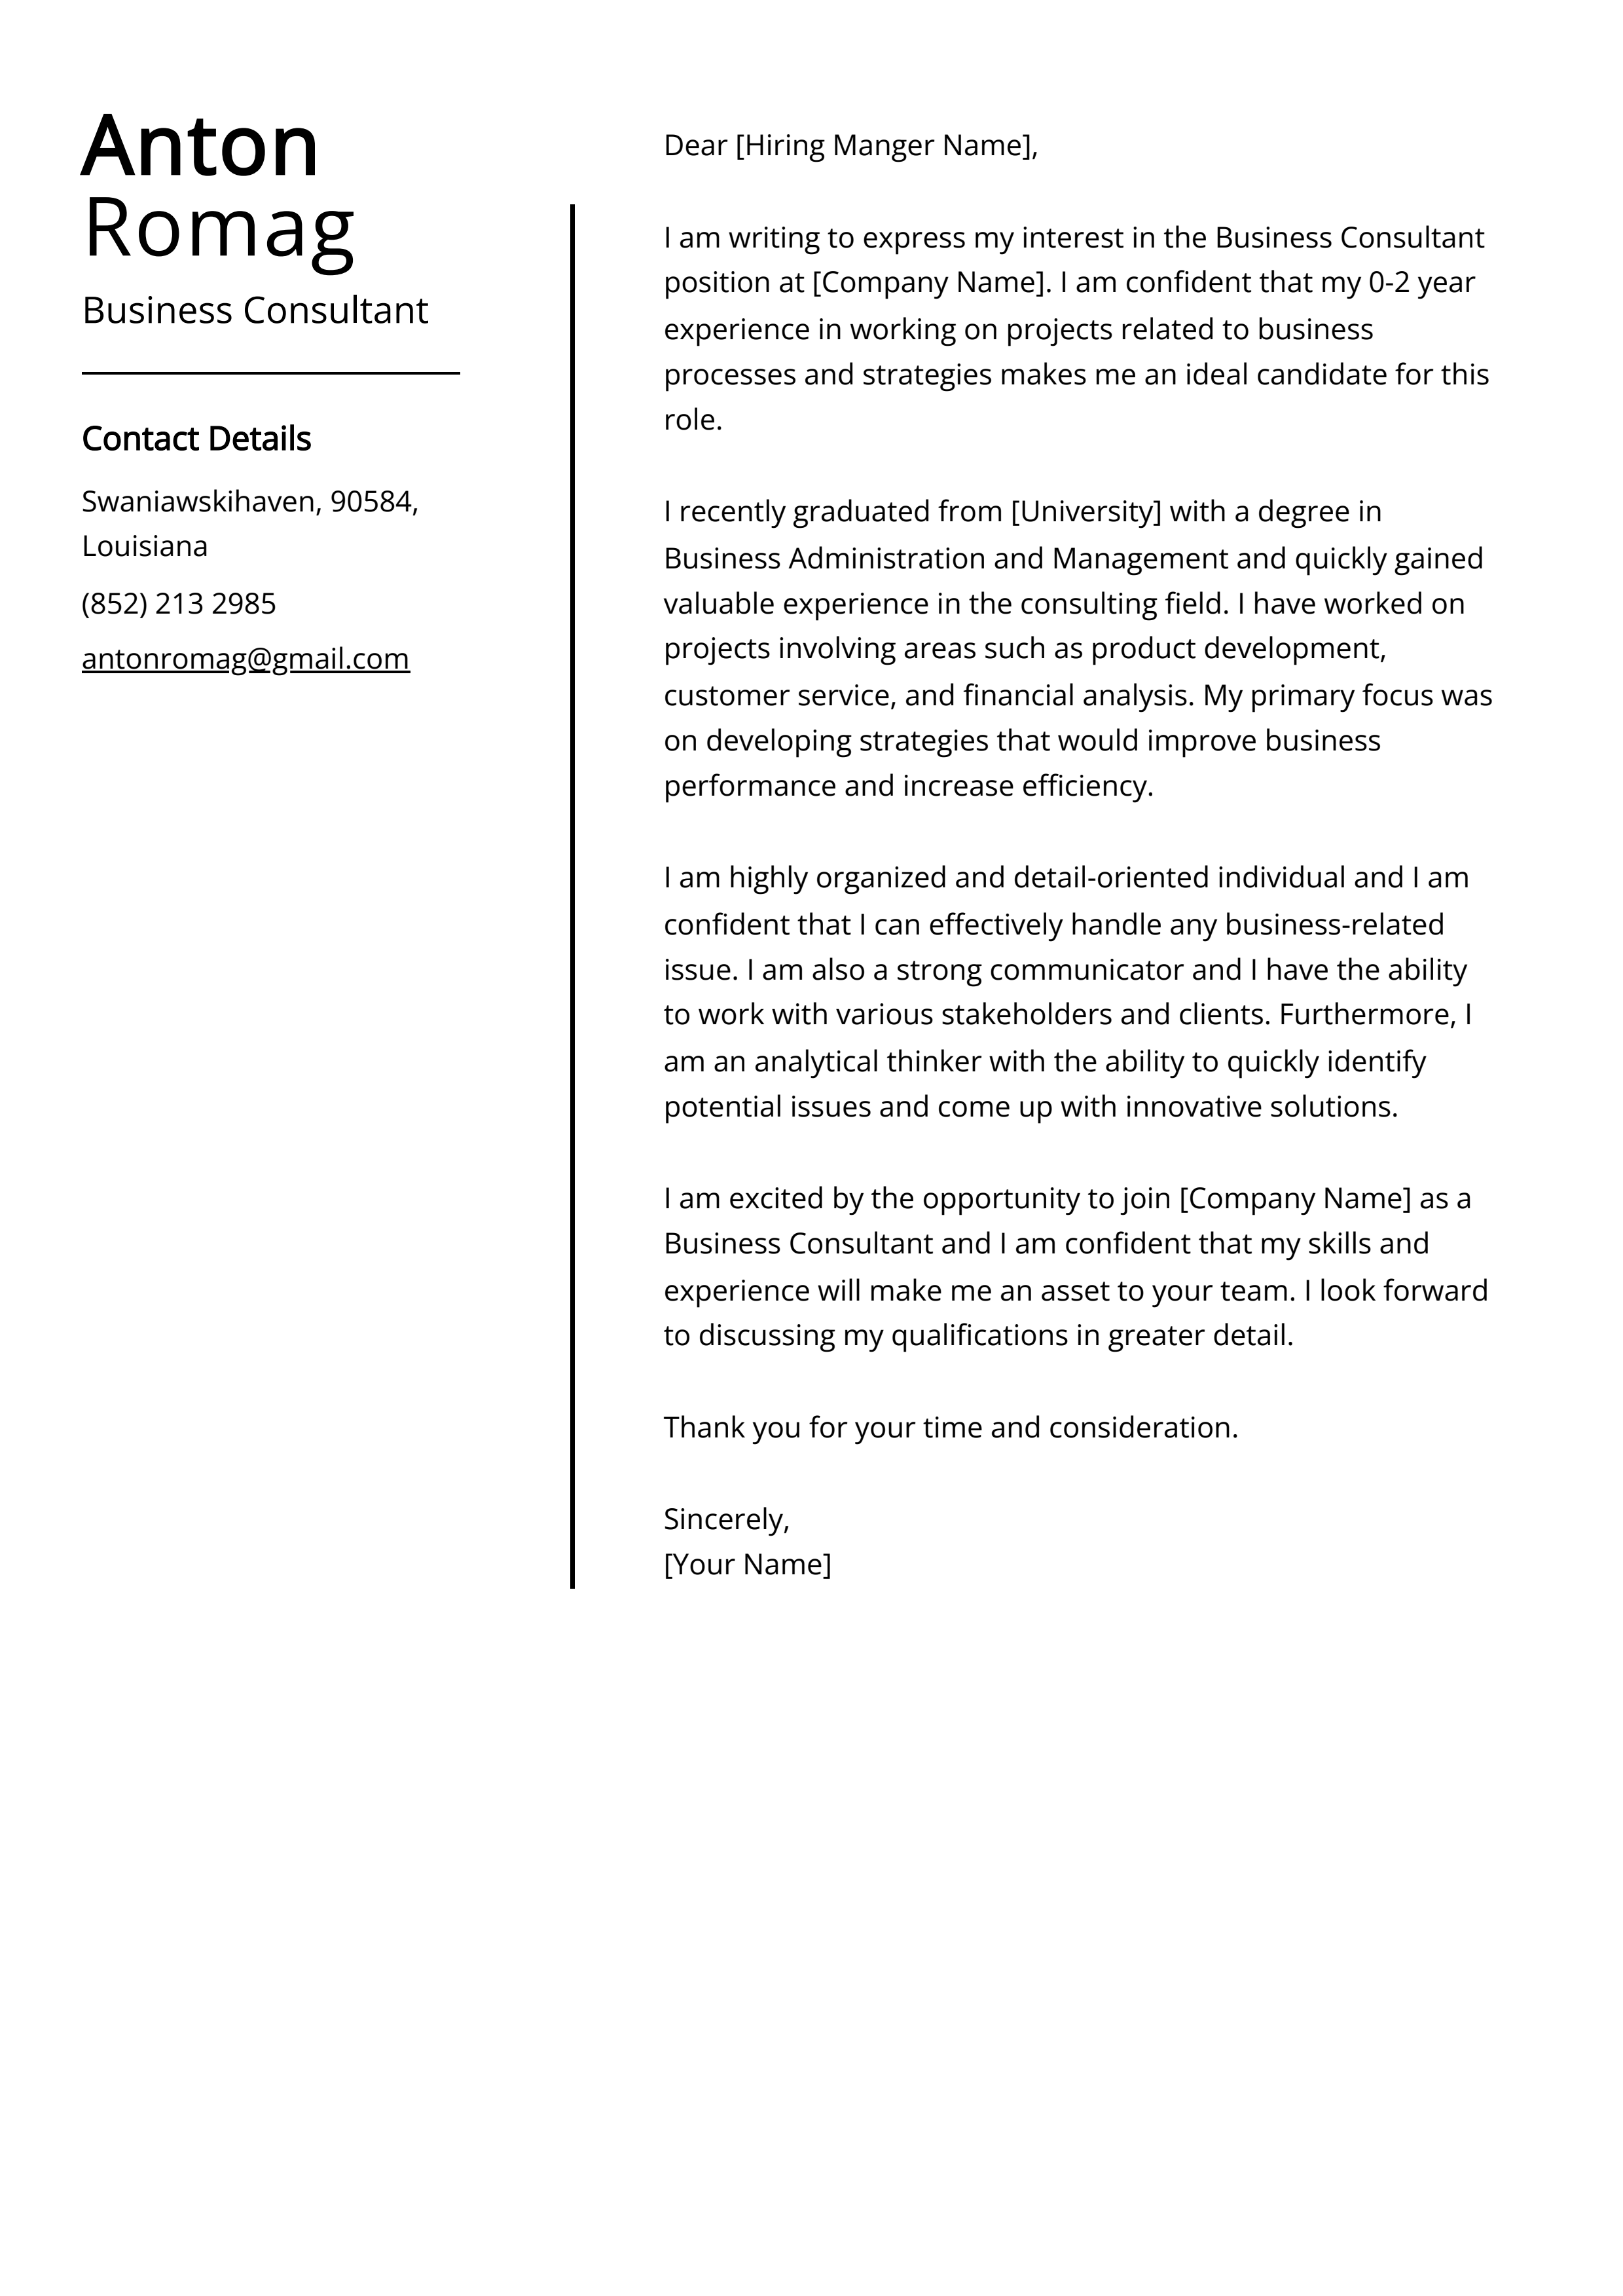 Business Consultant Cover Letter Example